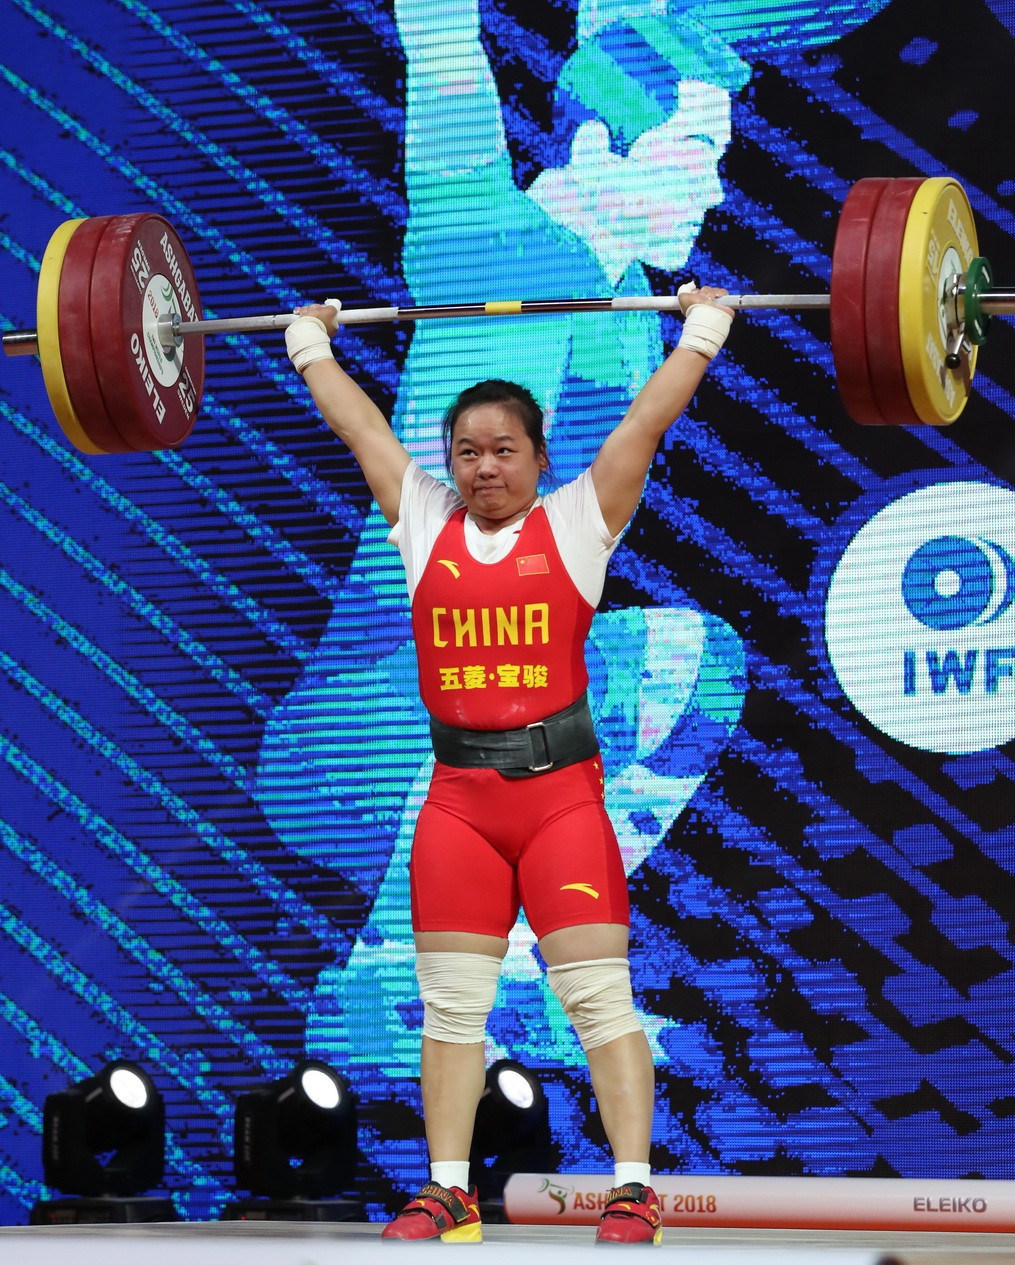 China's Zhang Wangli managed world standards in the clean and jerk and total on her way to securing all three gold medals at the IWF World Championships in the women's 71kg event ©IWF